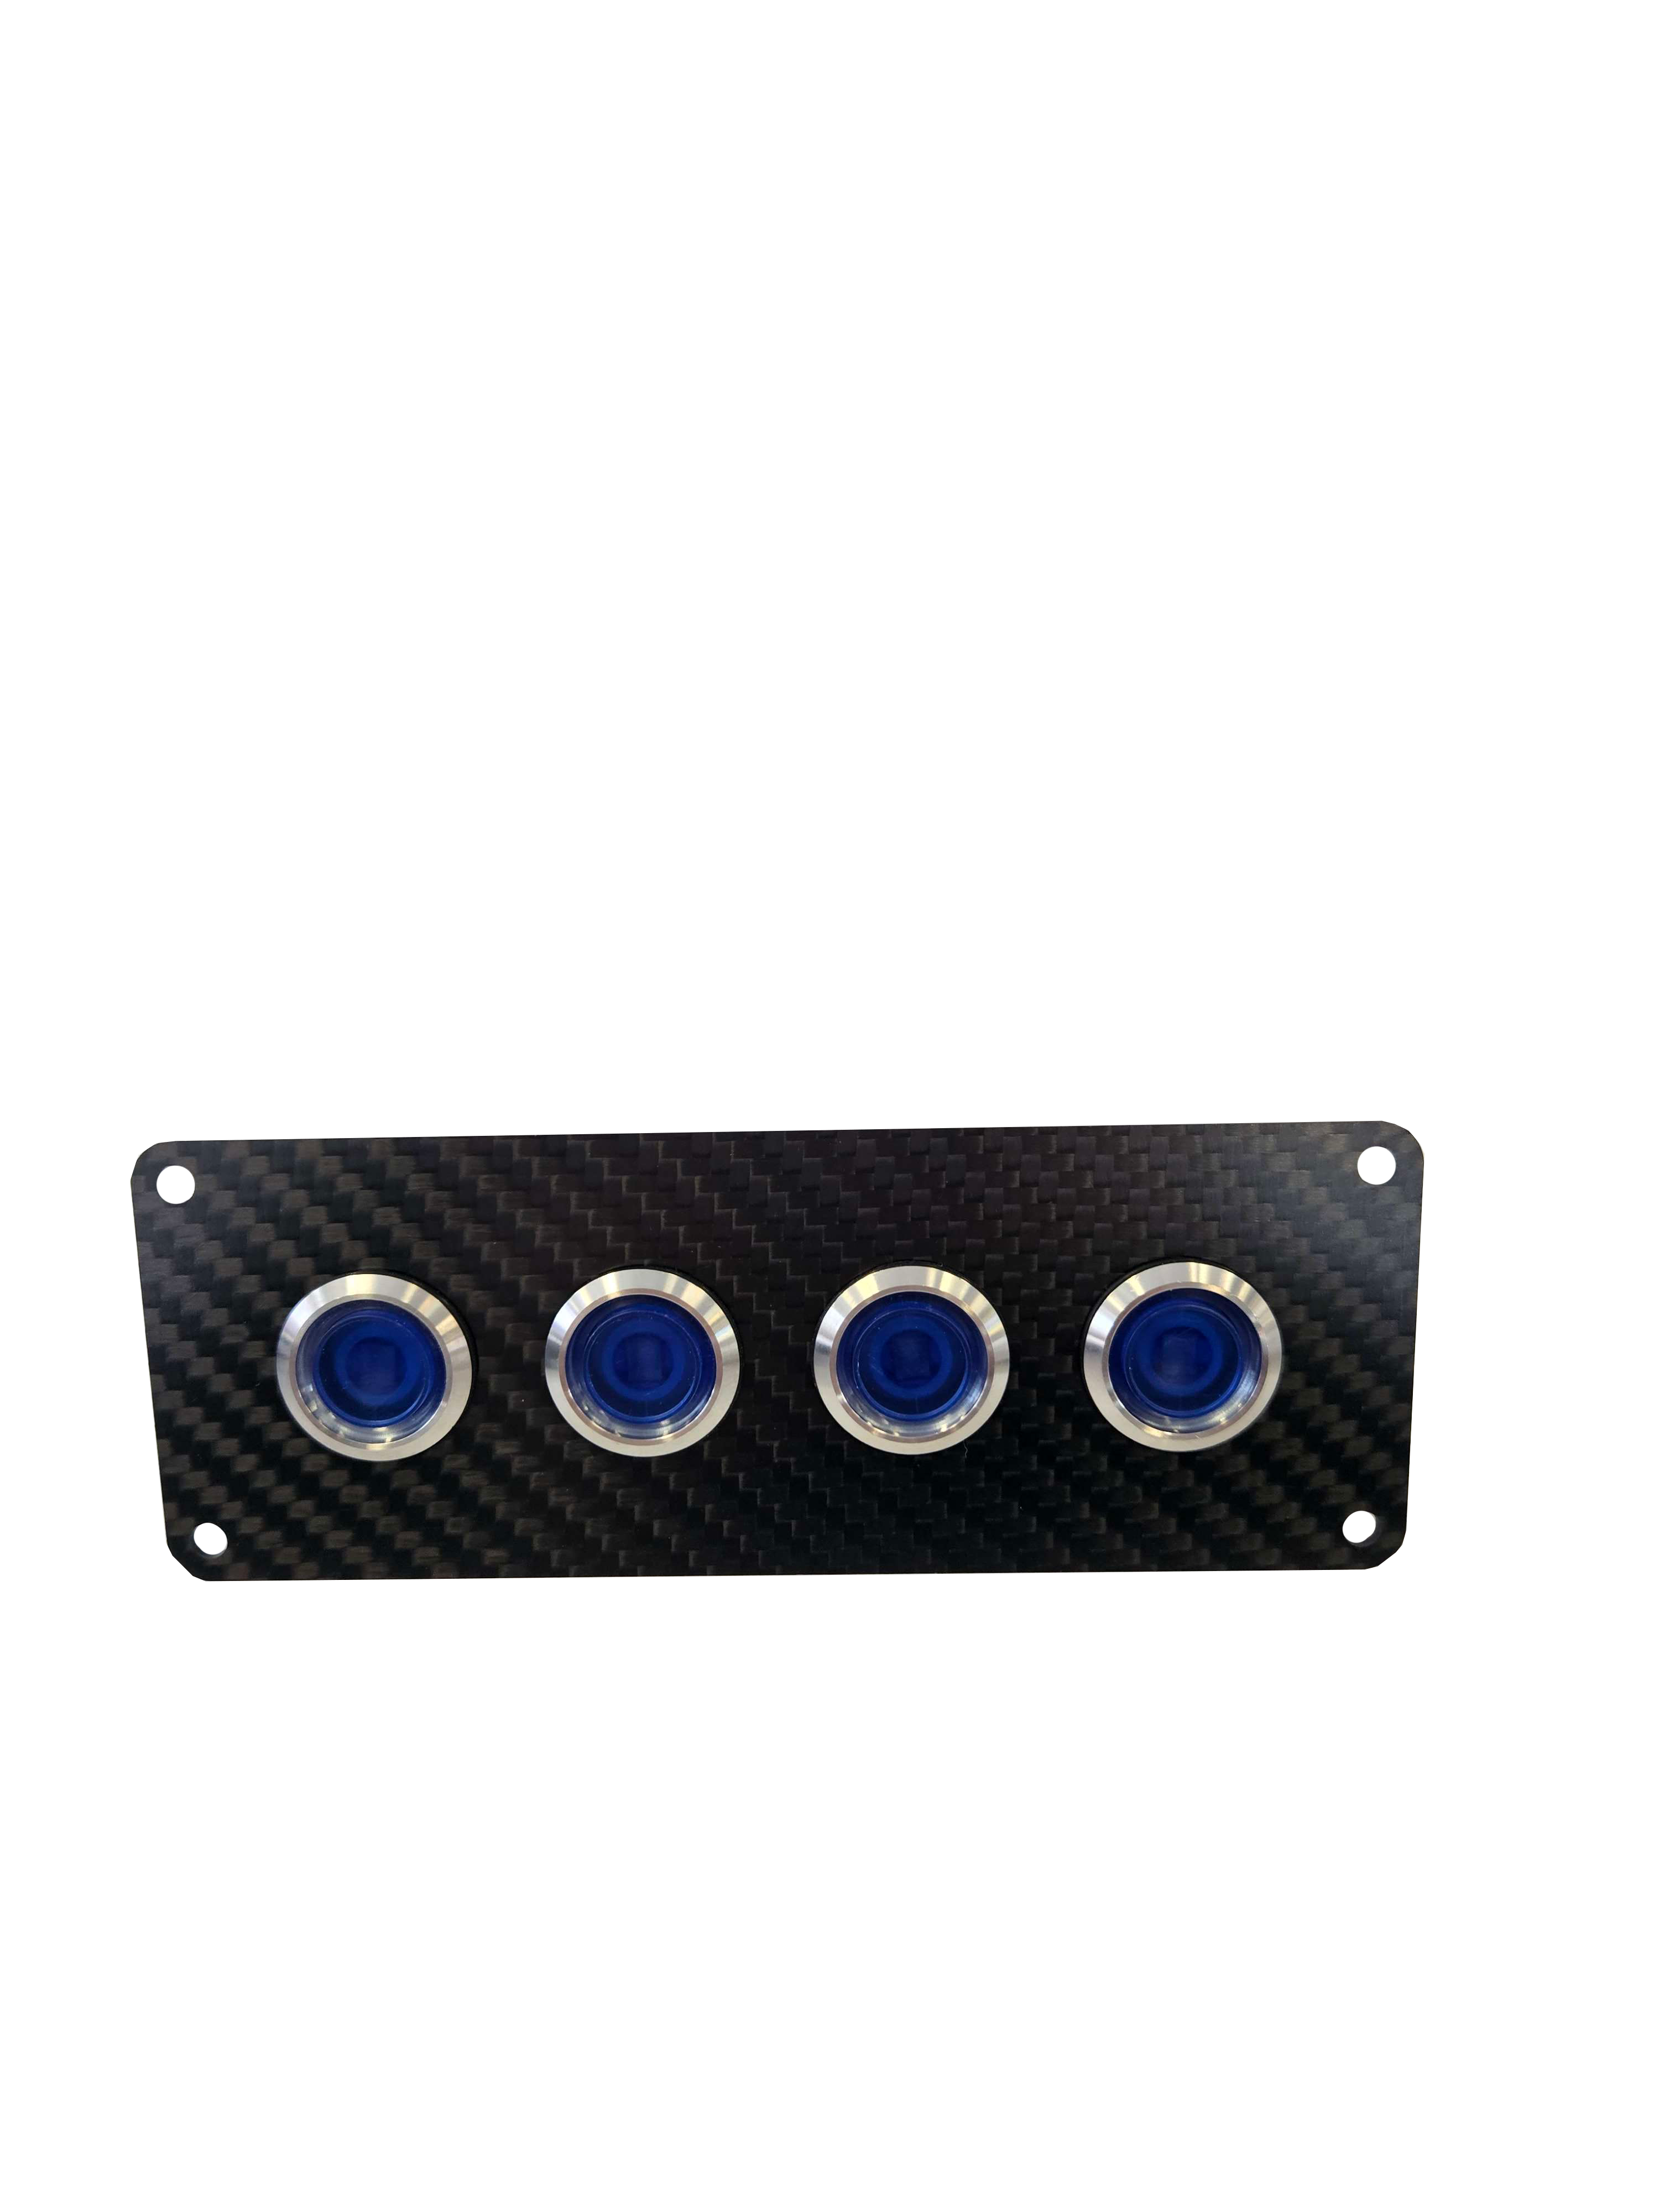 4 gang carbon fibre switch panel with 15A backlit switches